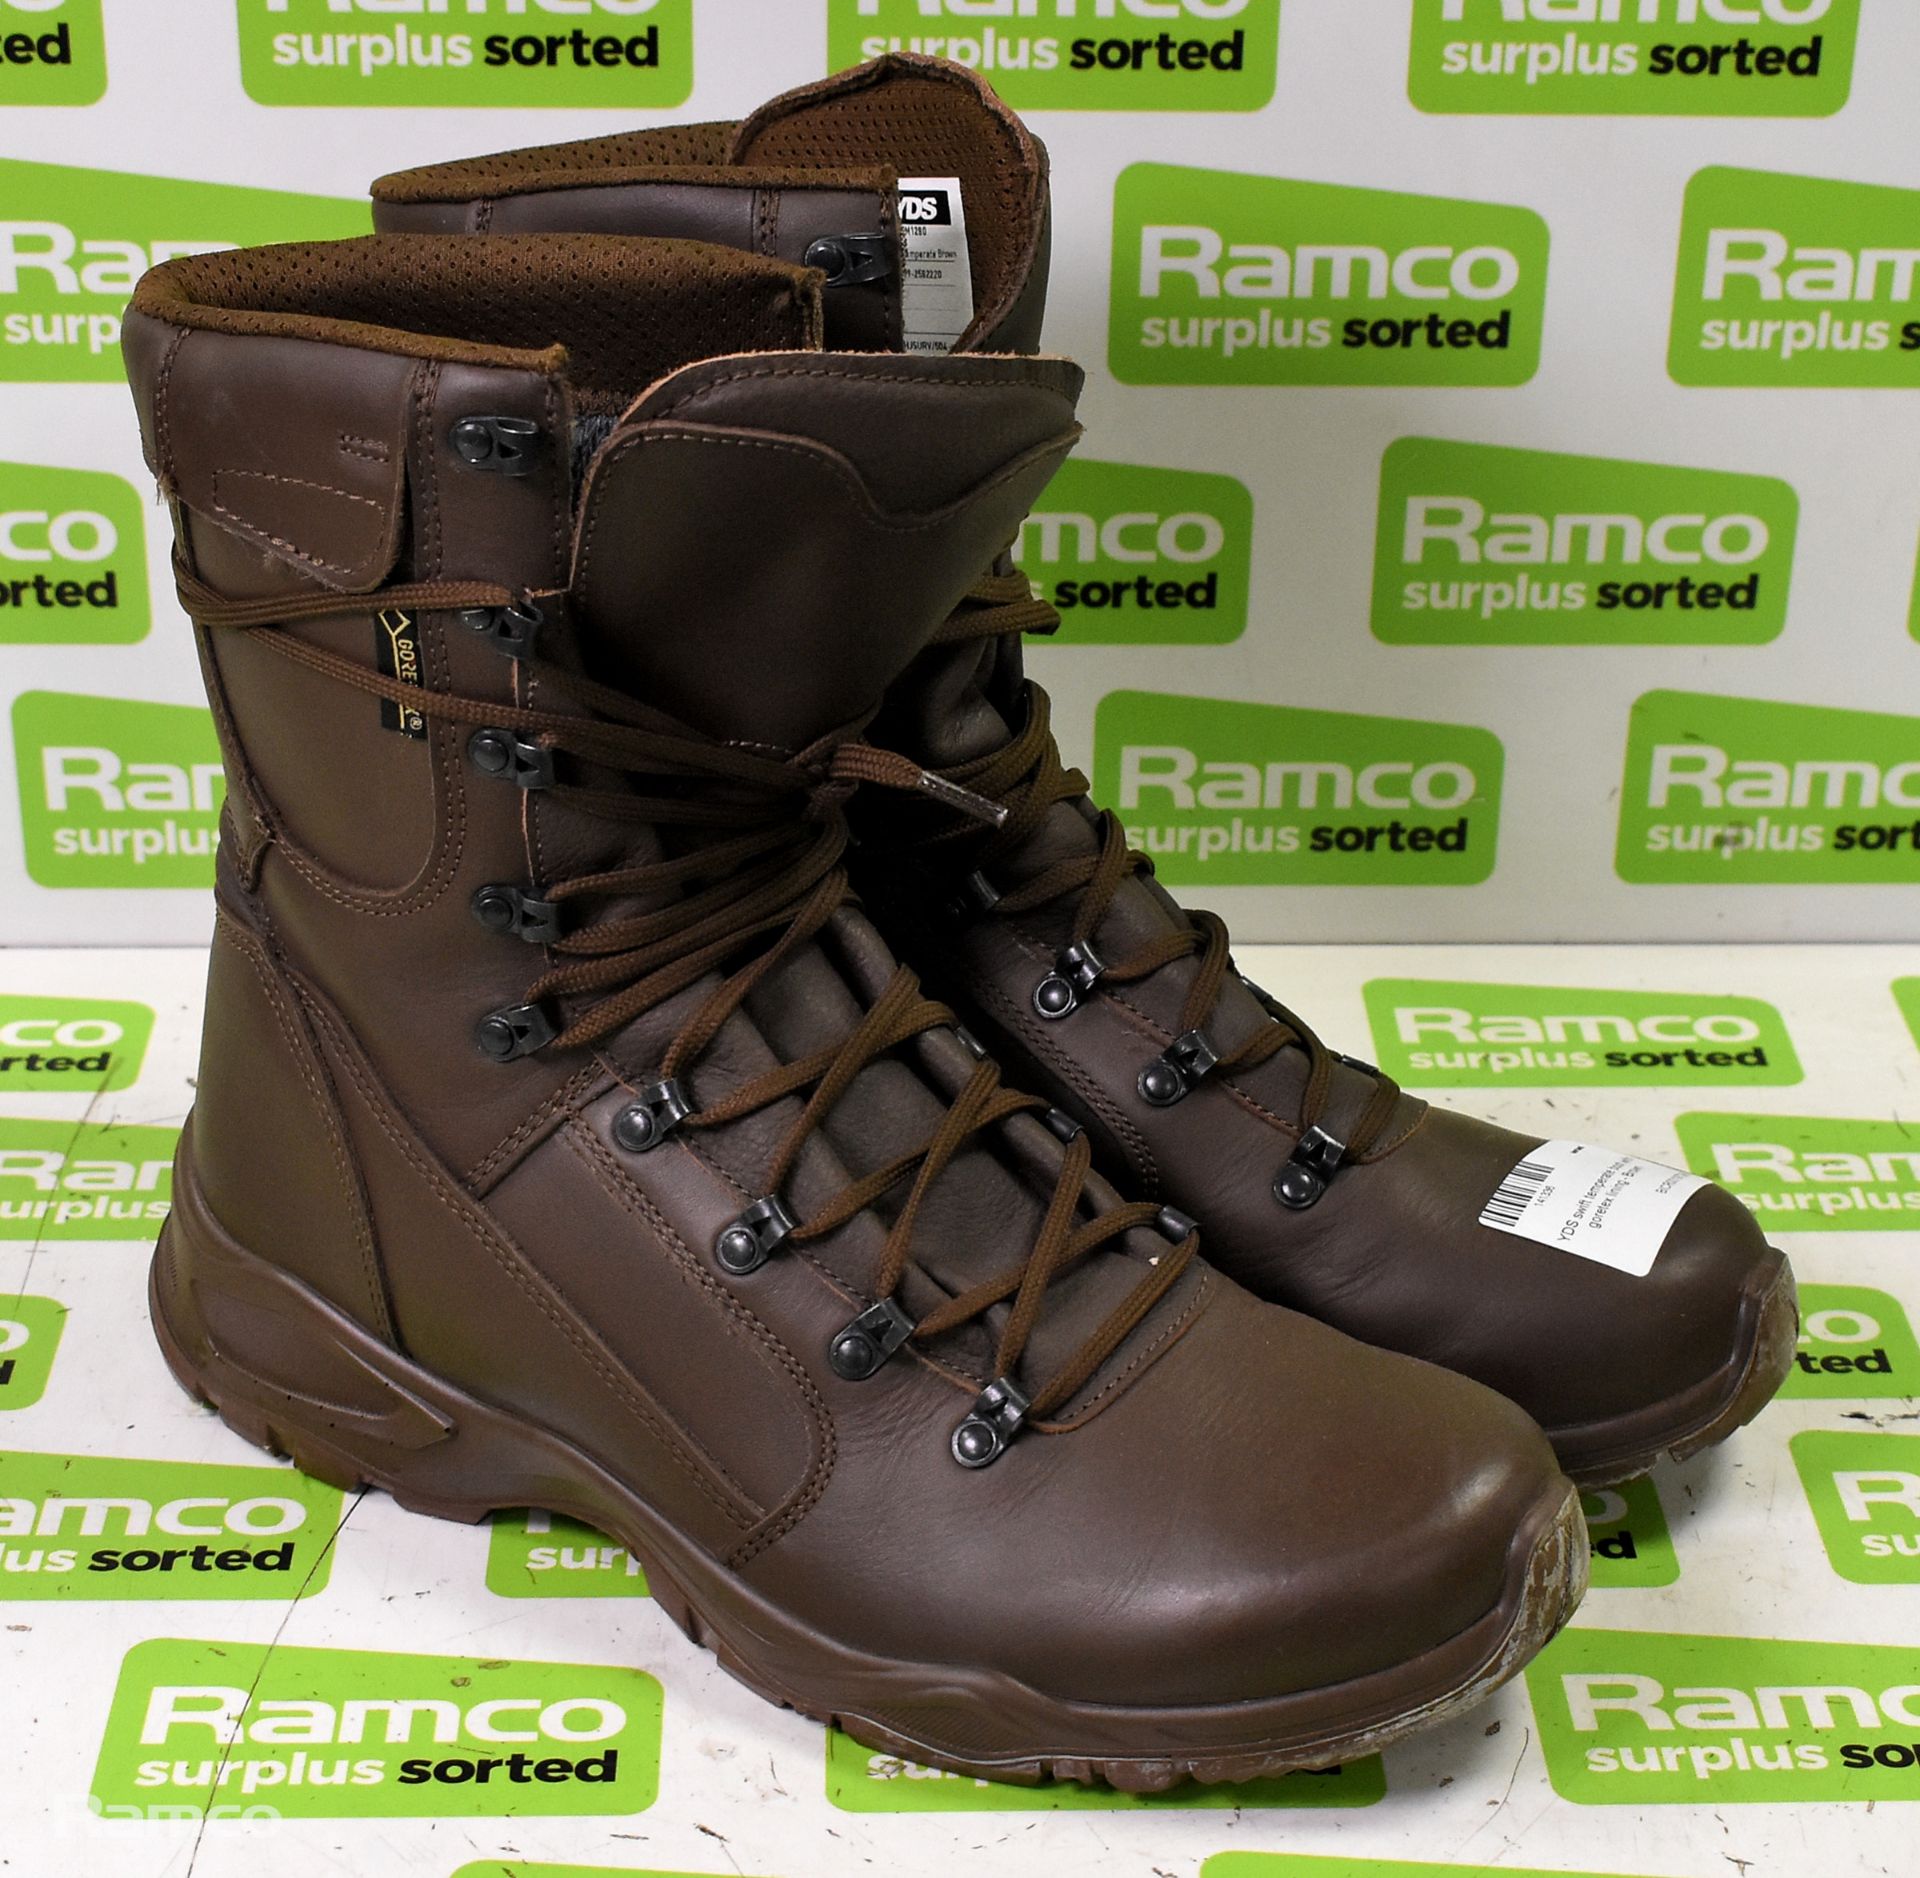 YDS swift temperate boots with Gore-tex lining - Brown - 11M